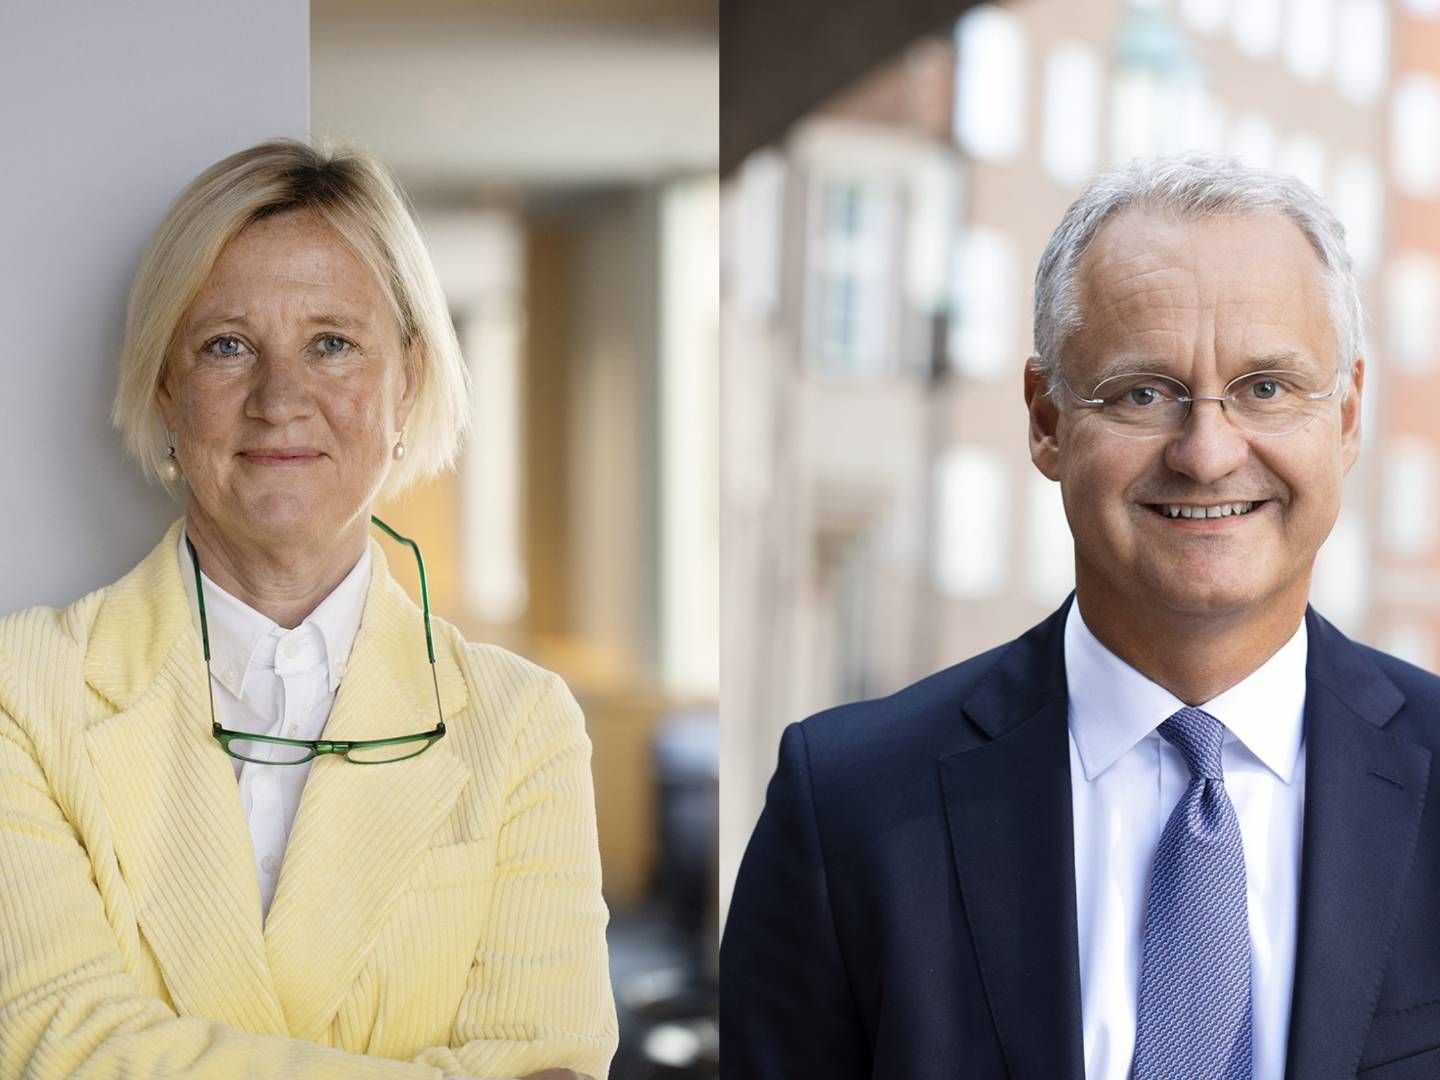 Ingrid Bonde takes on added responsibilities in her role as chairman of Alecta, while CEO Magnus Billing has been sacked. | Photo: PR /Alecta